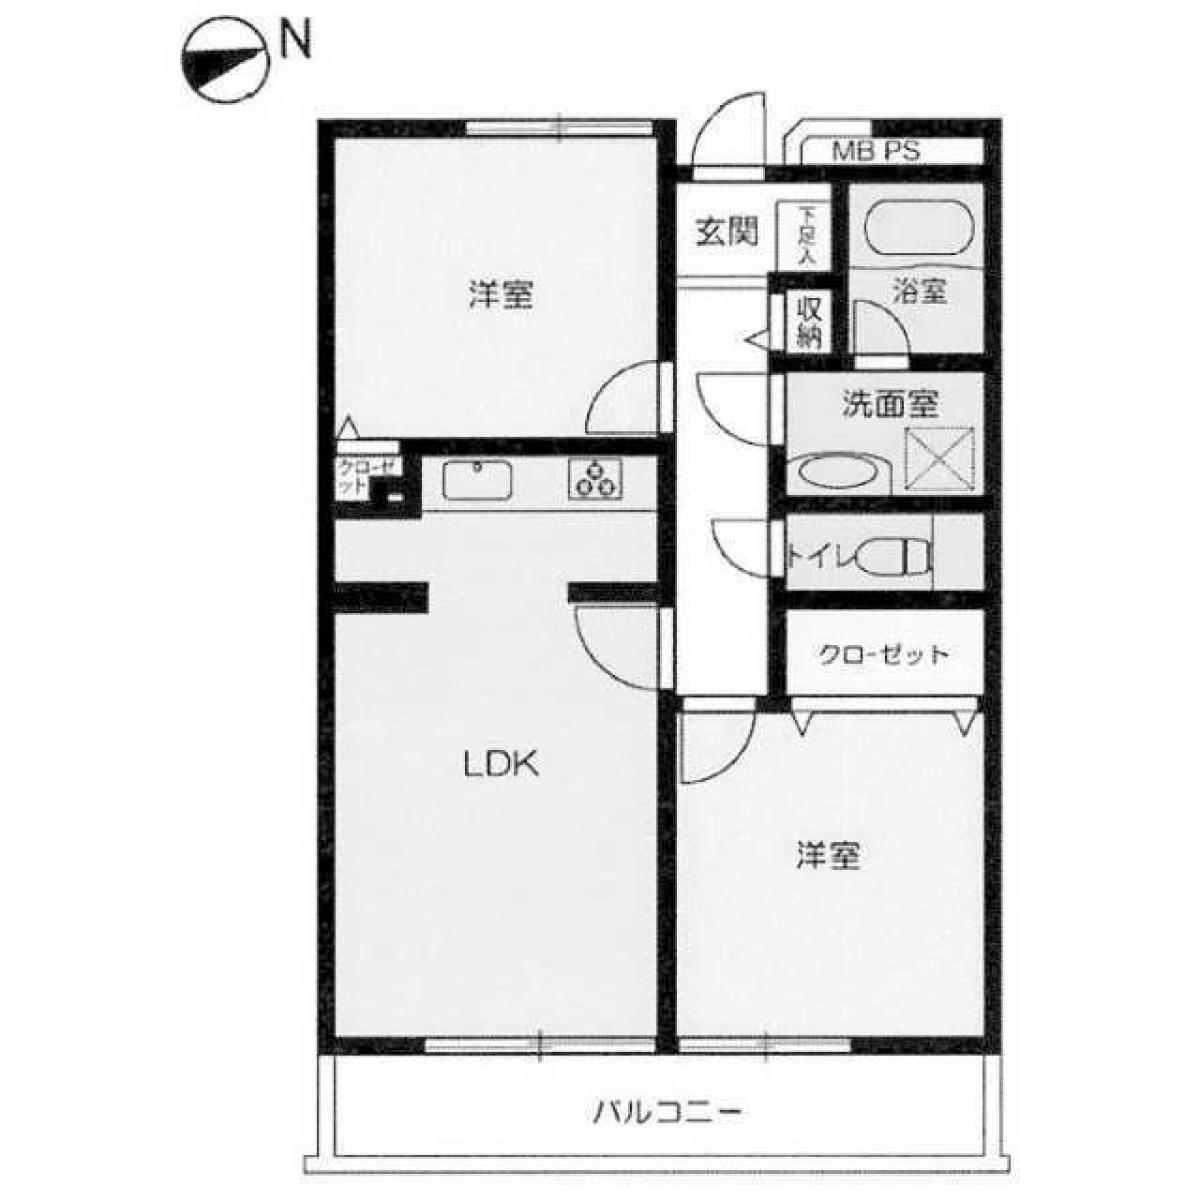 Picture of Apartment For Sale in Sumida Ku, Tokyo, Japan